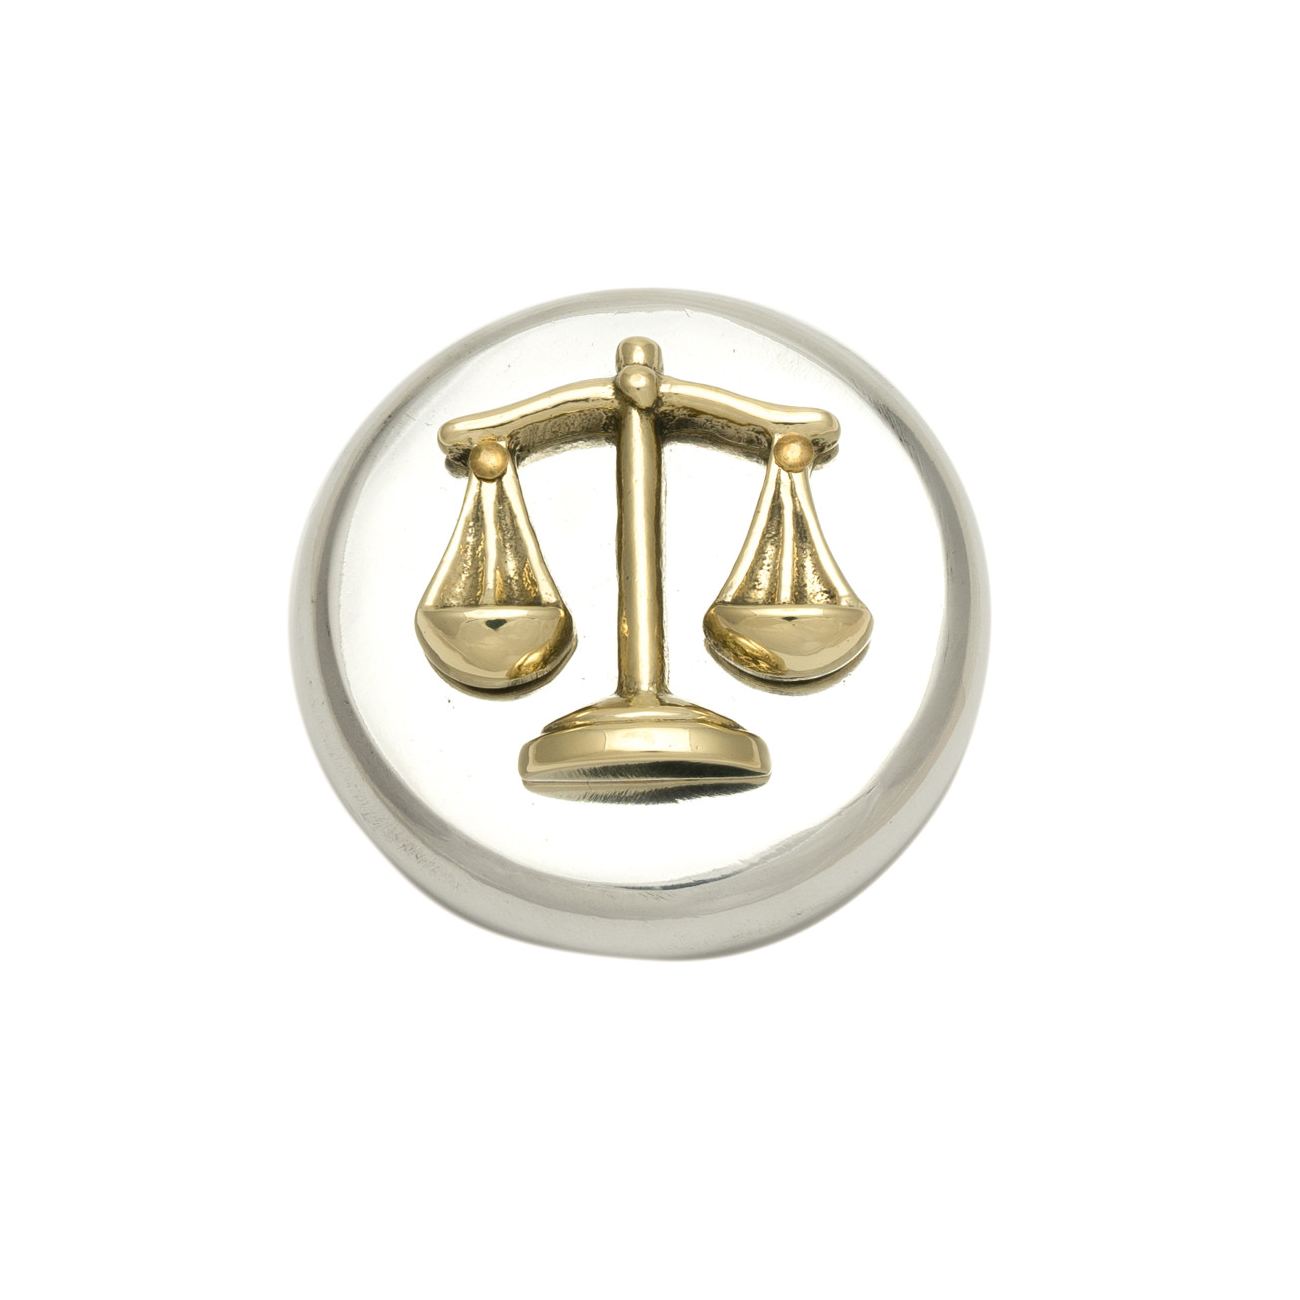 https://www.elitecrafters.com/image/cache/data/uploads/201911/C4%20METALART/SET42/desk_accessories_set_of_2__scale_or_balance_of_themis_design_symbol_of_justice_handmade_of_solid_metal_paperweight_kai_pen_cup_holder_2-1300x1300.jpg